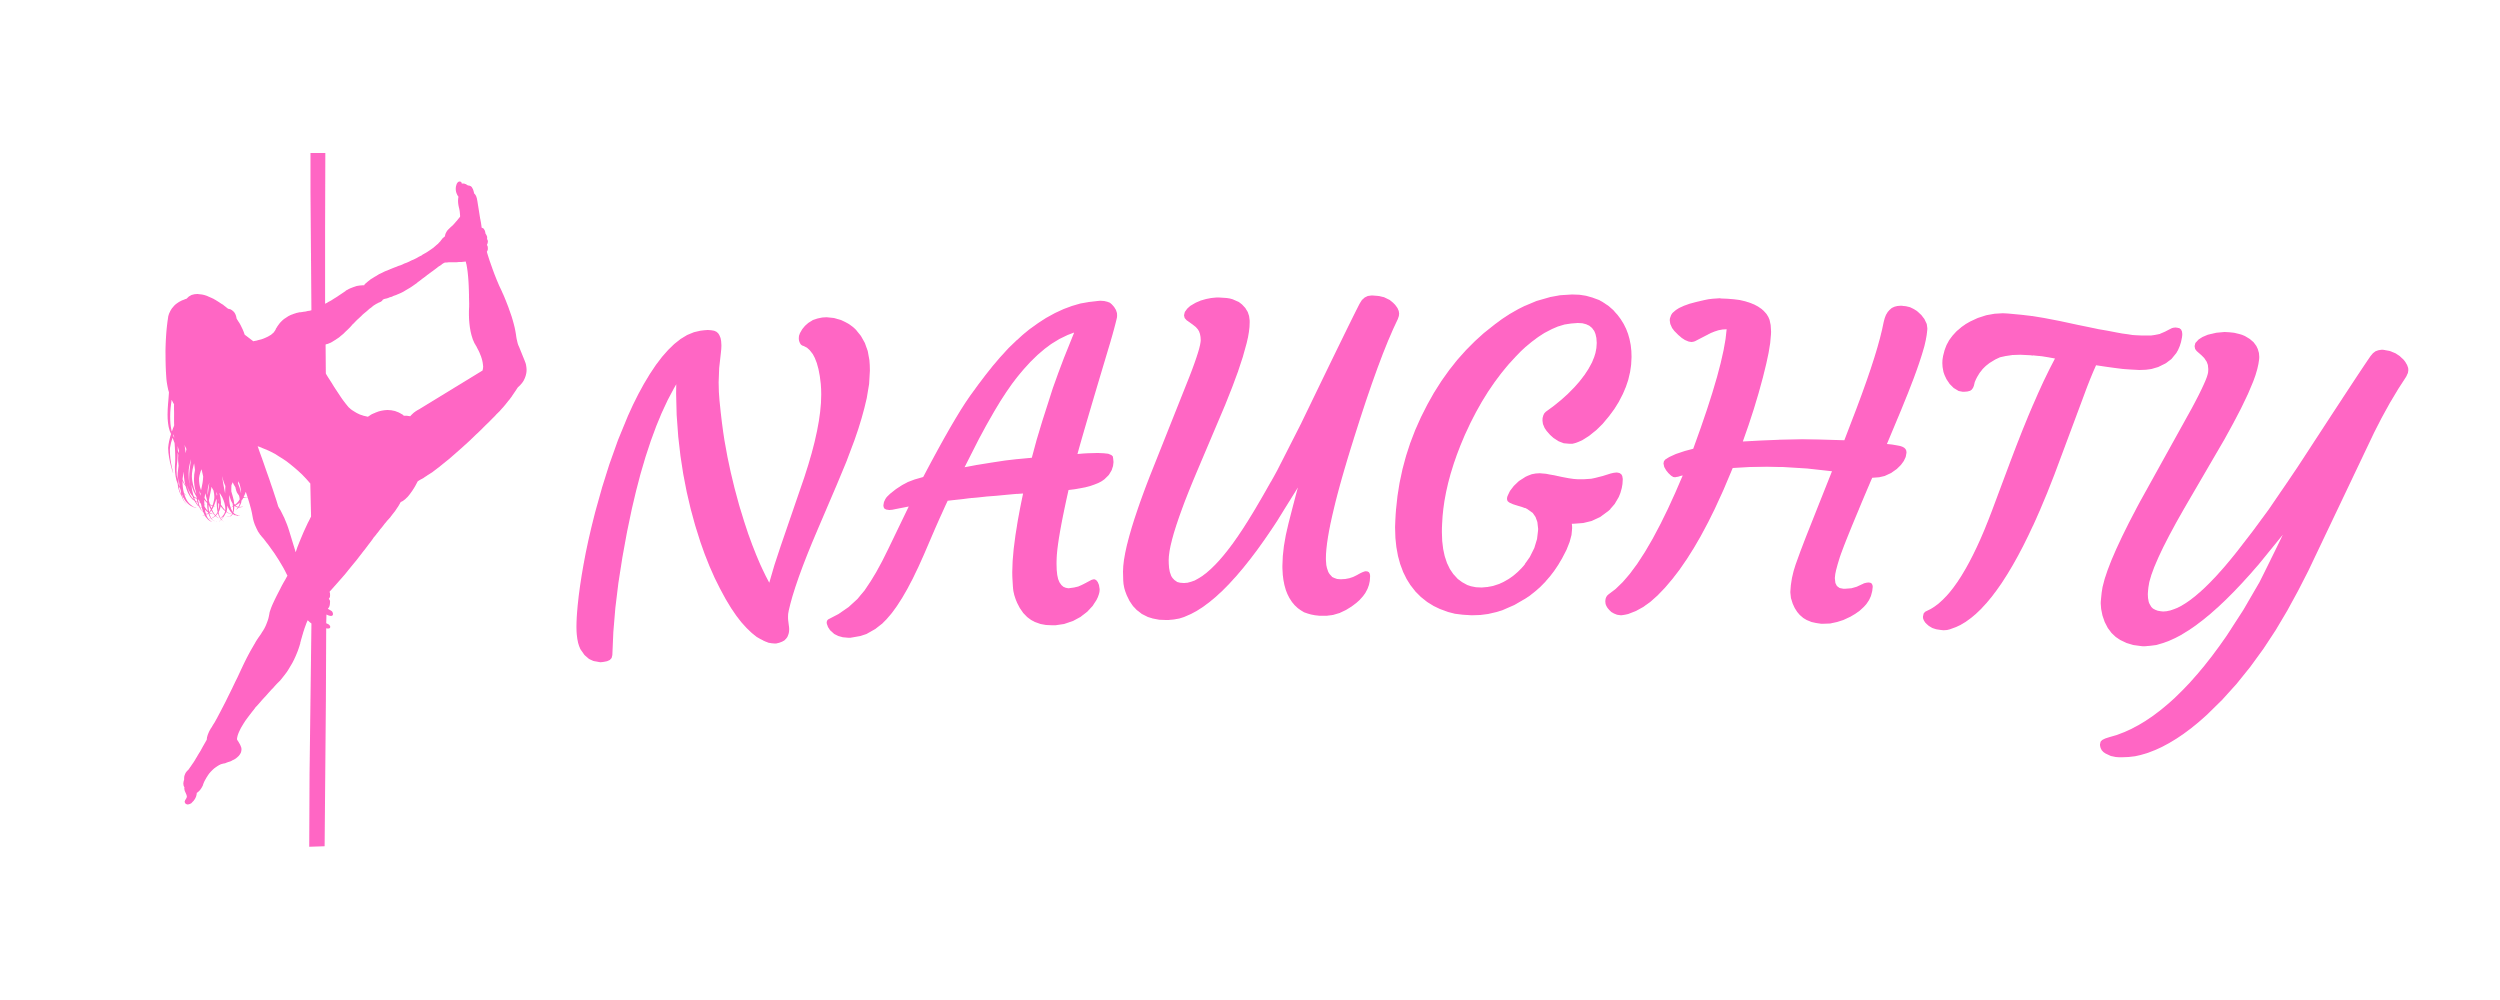 NaughtyStrippers.com